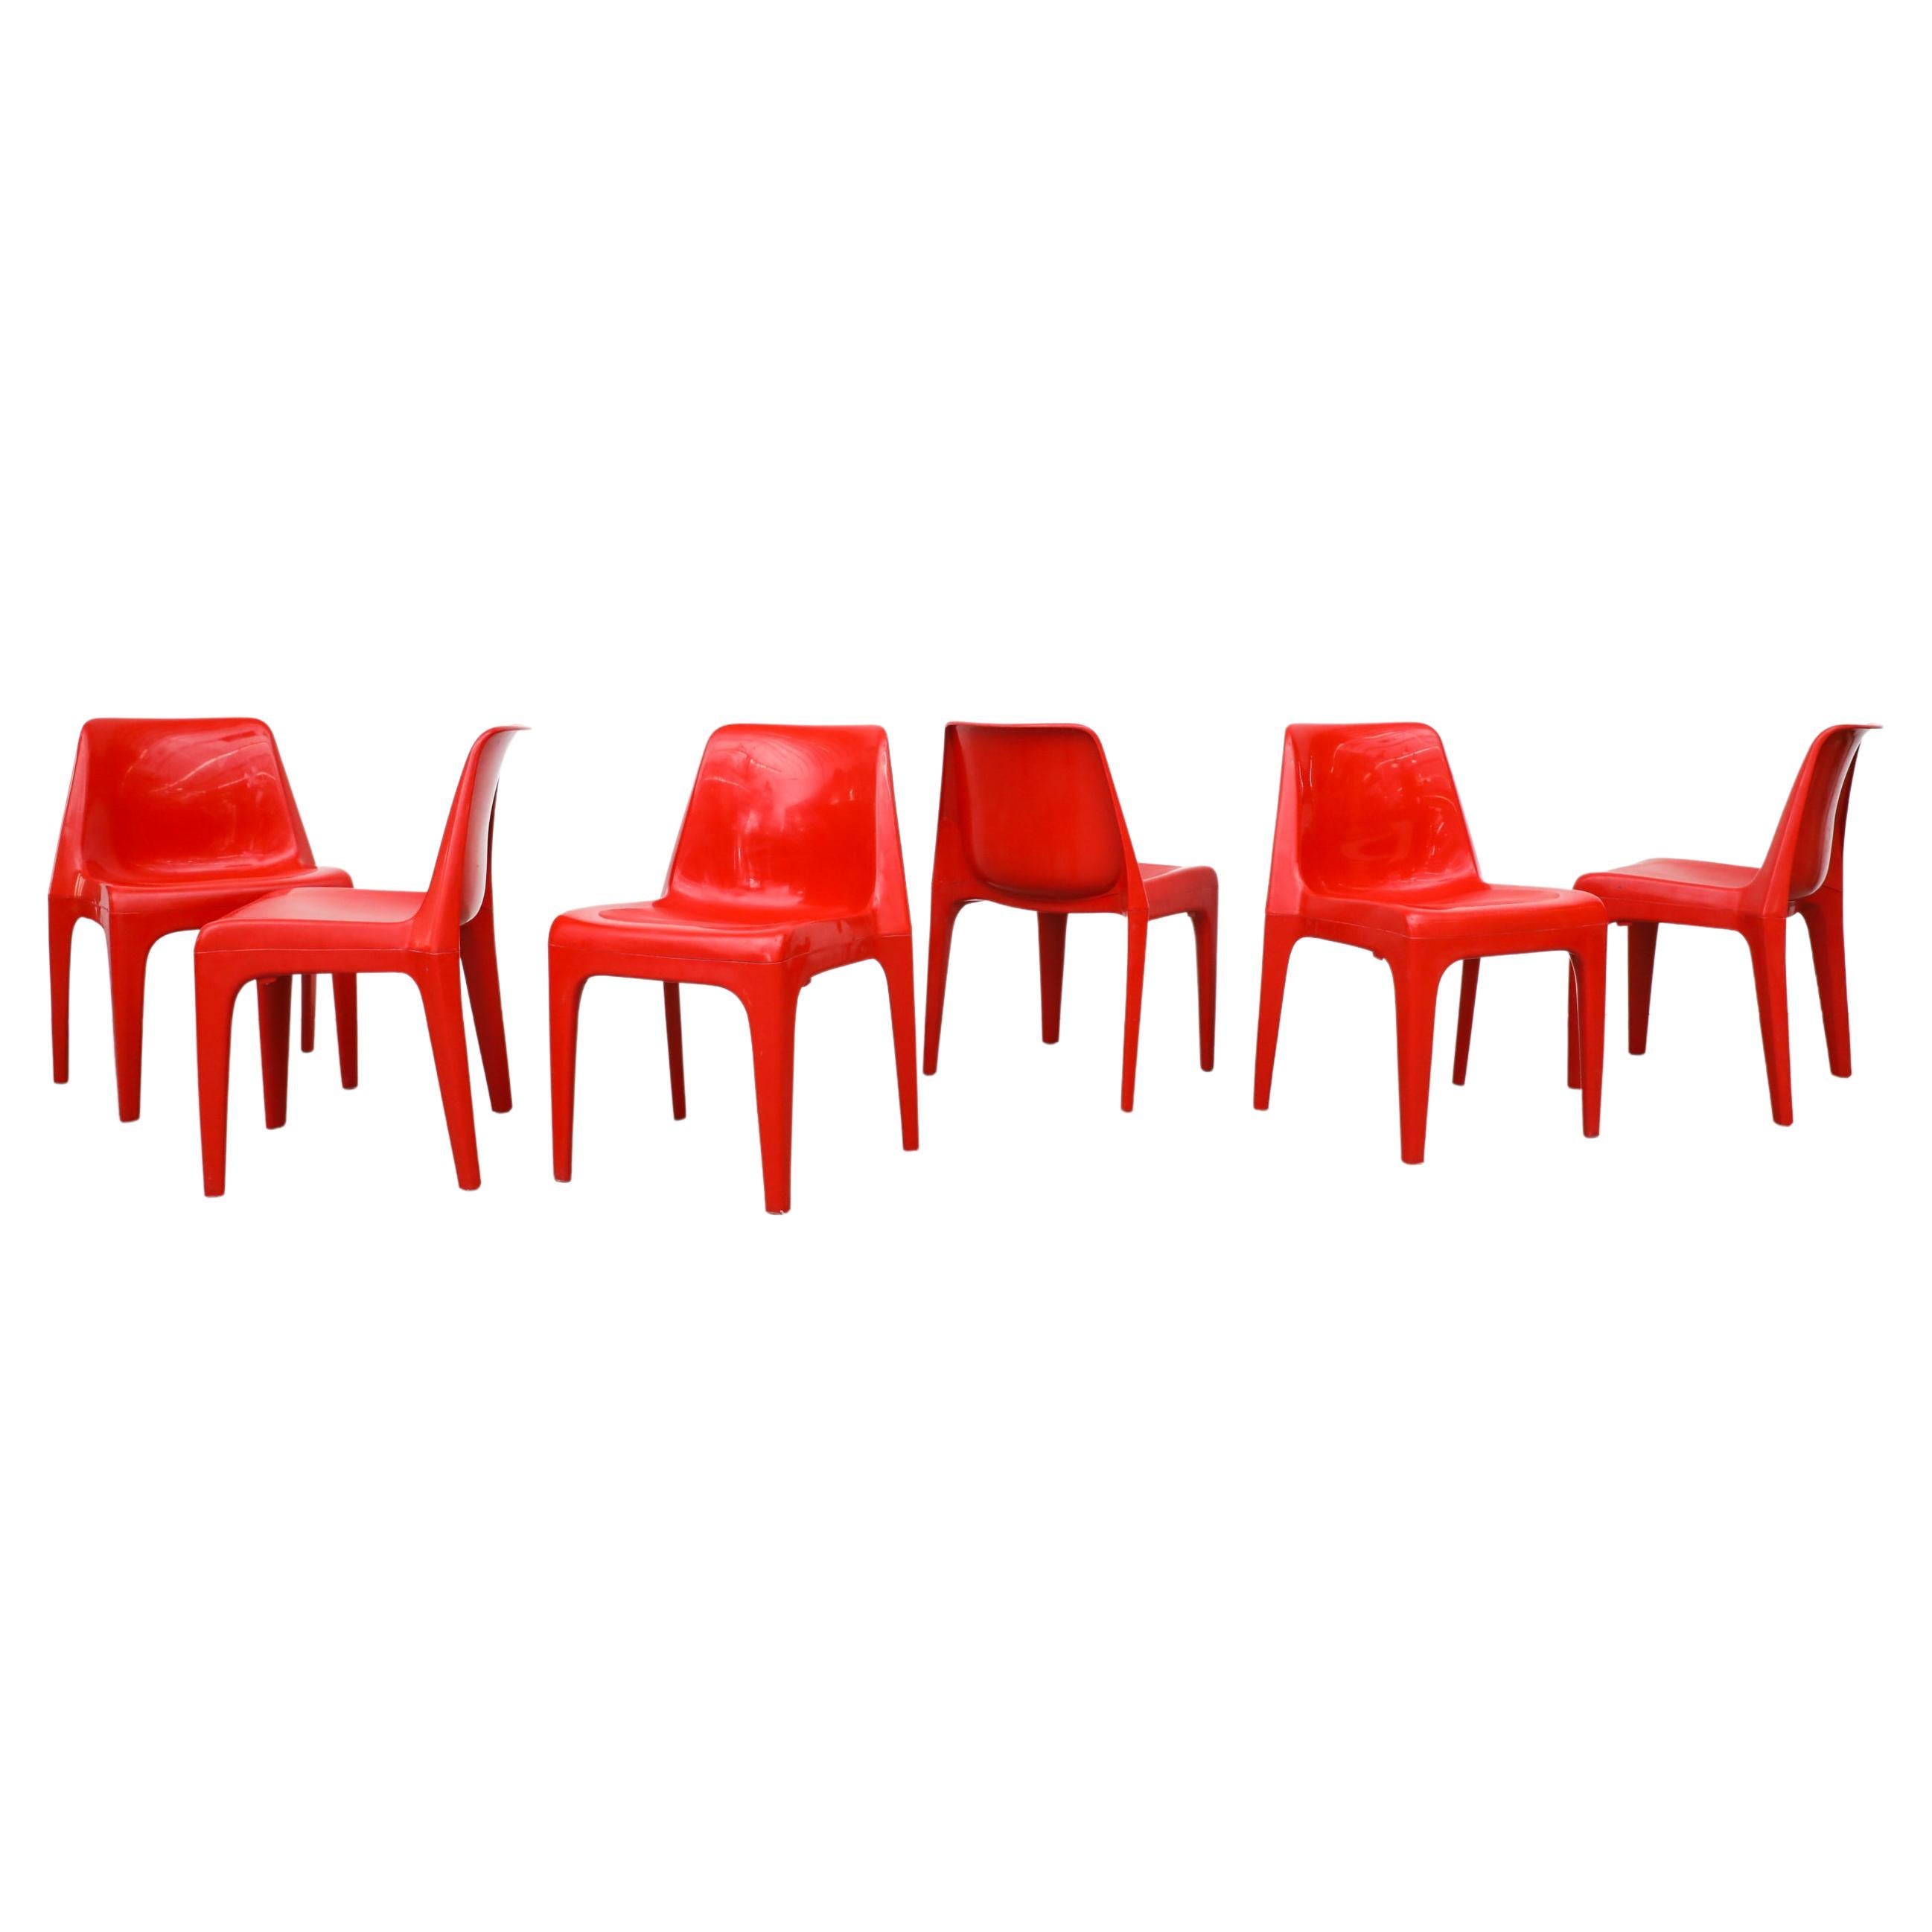 MOD Red Kartell Style Acrylic Stacking Chairs For Sale at 1stDibs